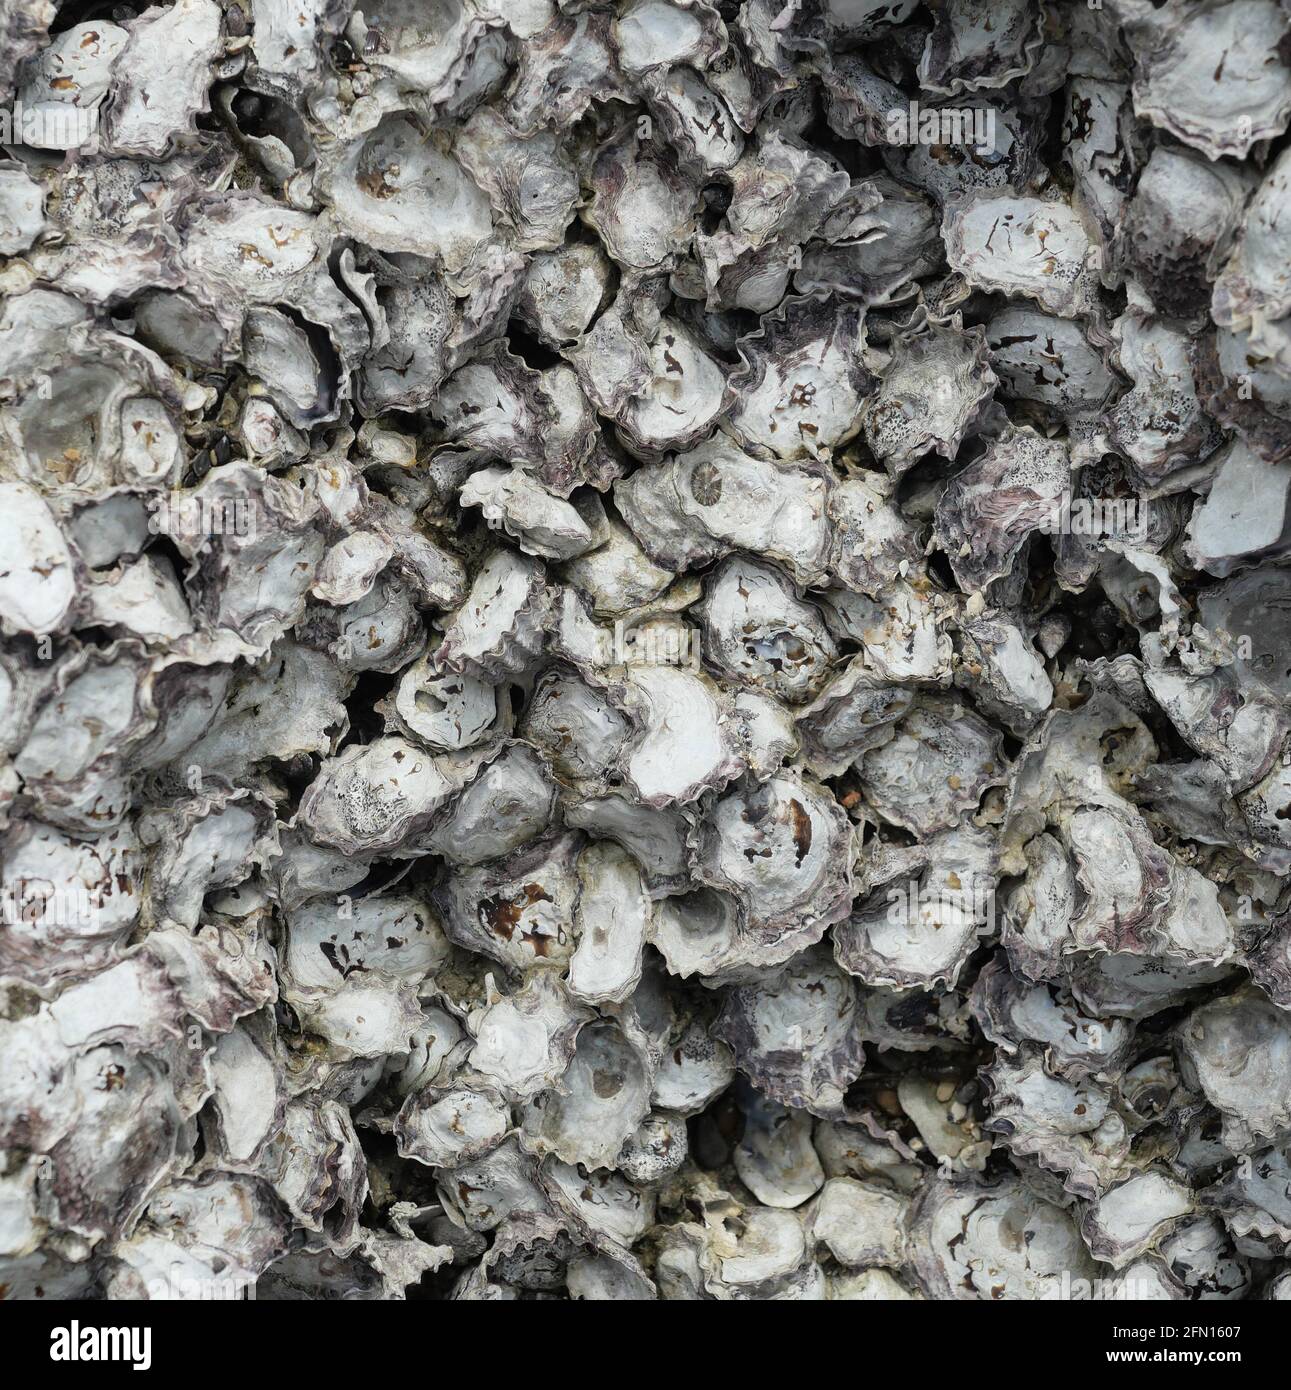 Wild oysters attached on rocky reef at low tide, Group of sea shells Stock Photo